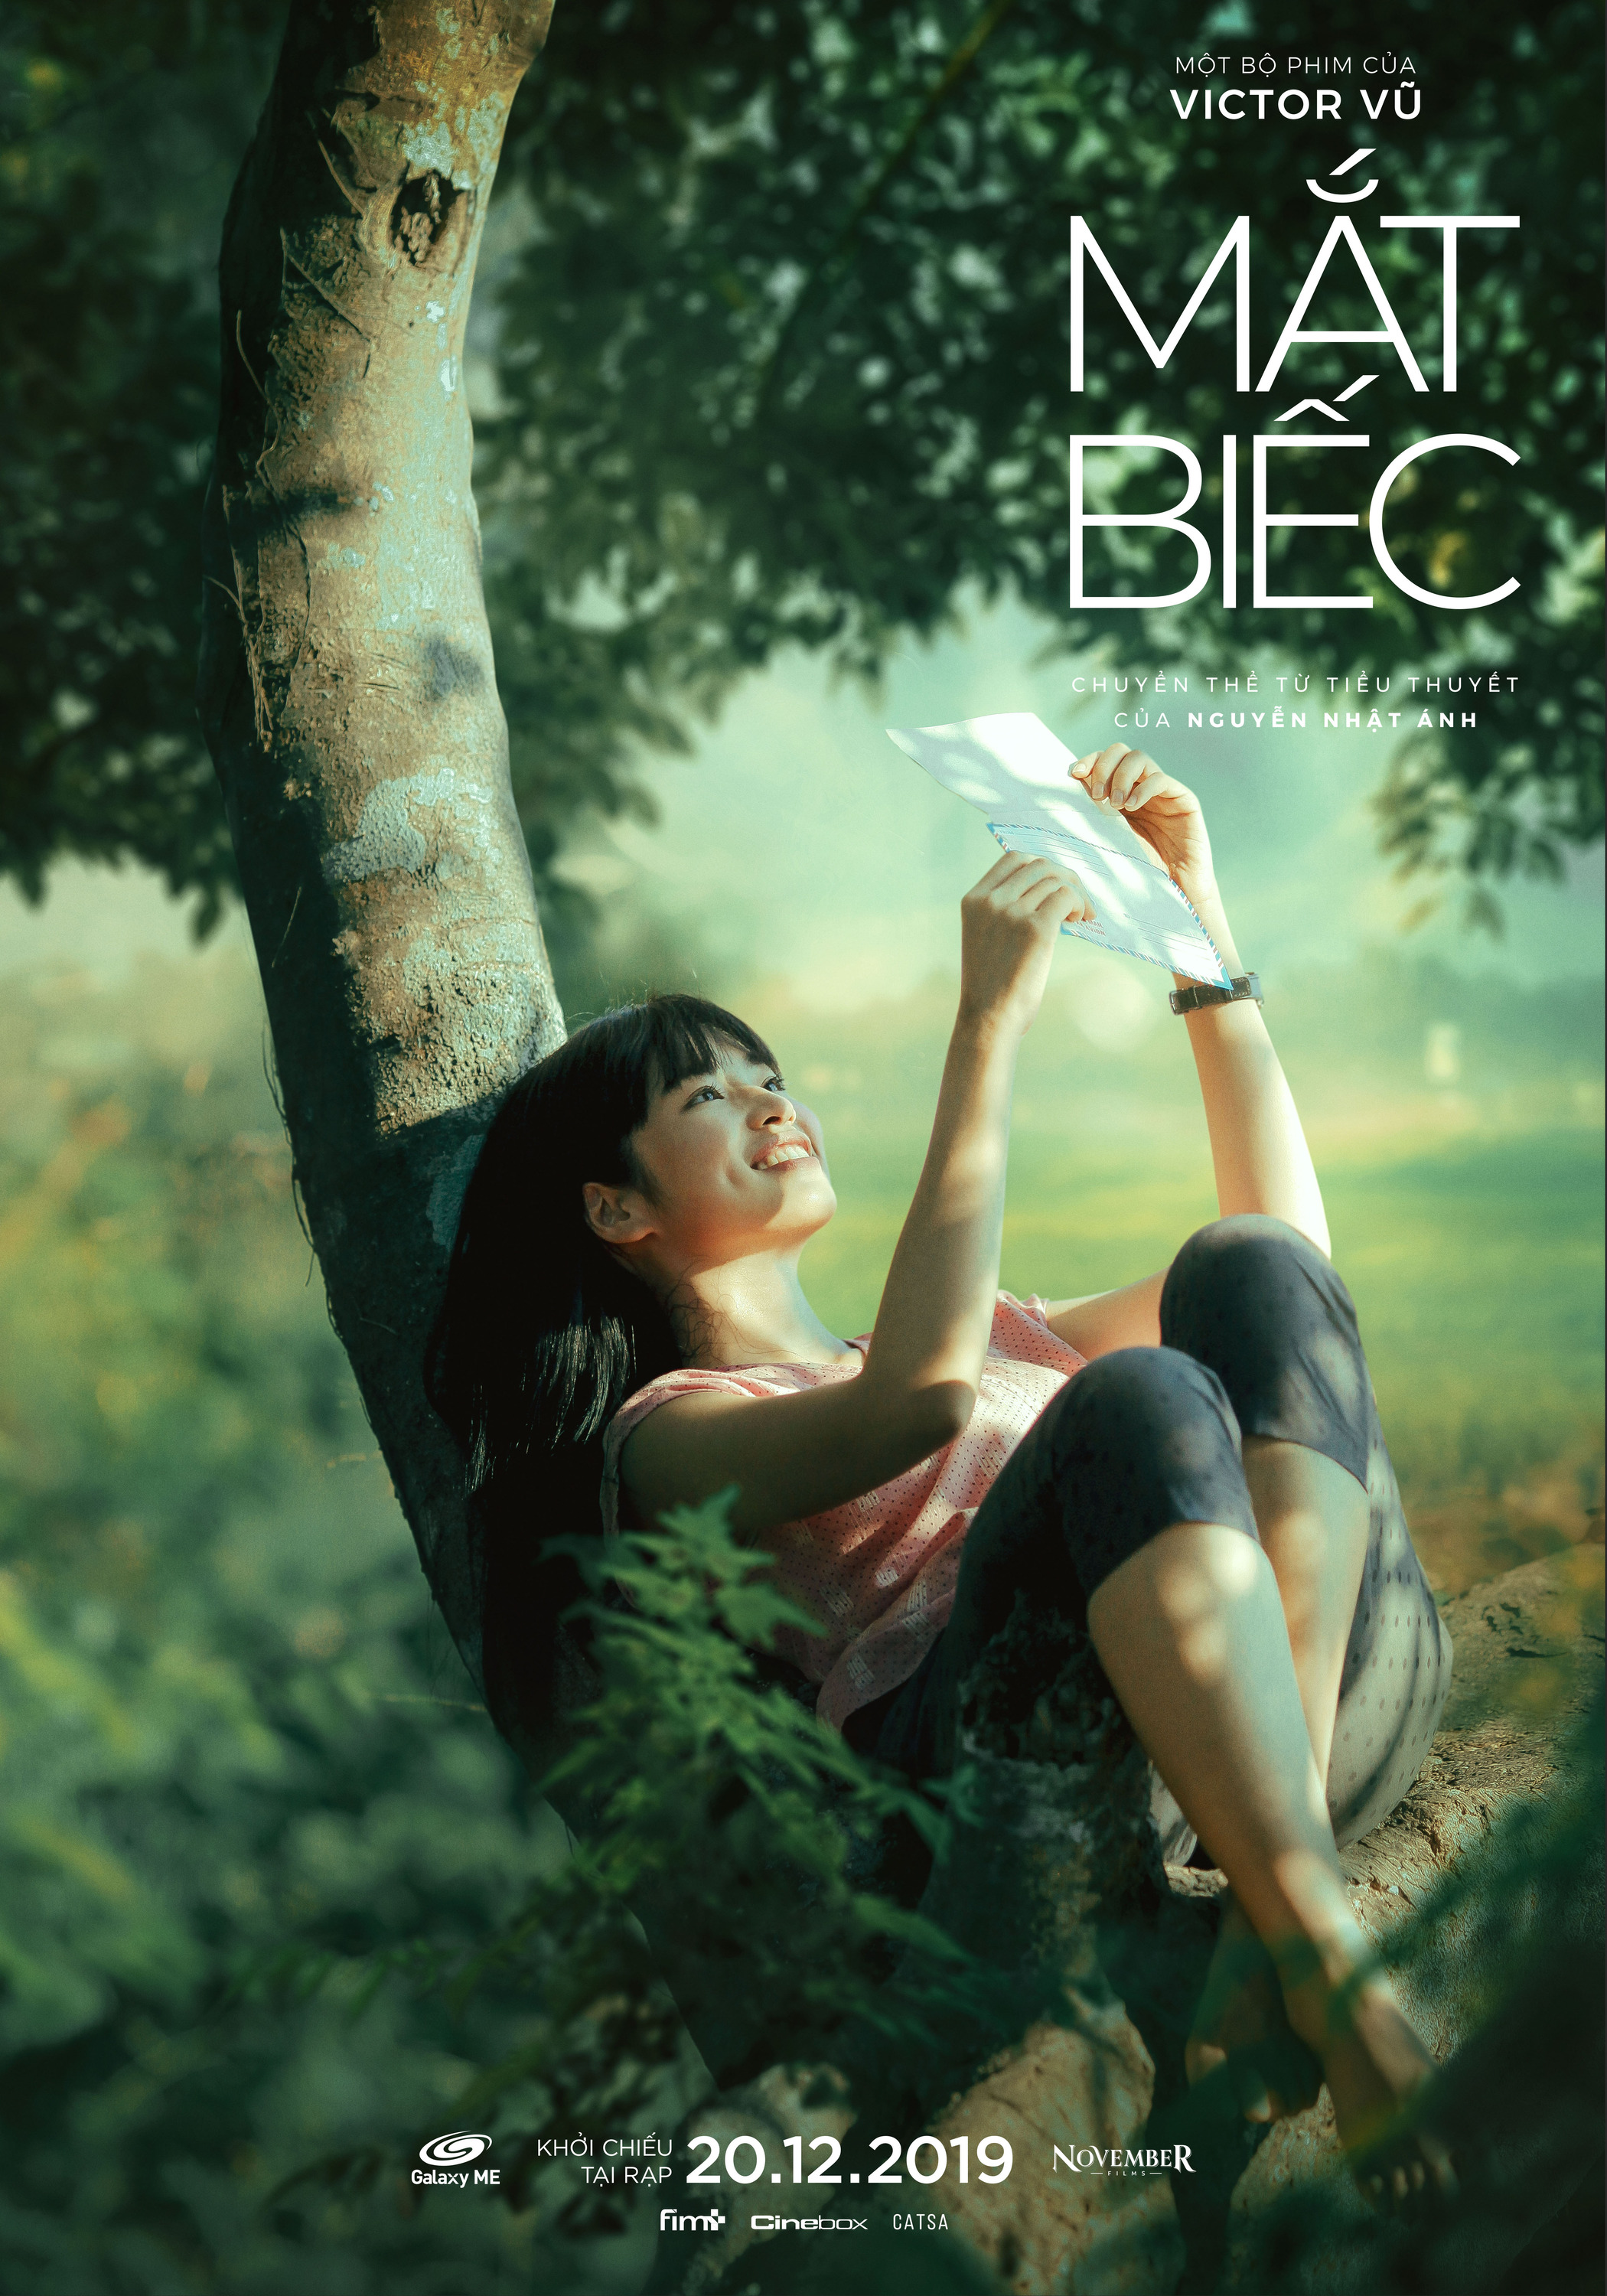 Mega Sized Movie Poster Image for Mat biec (#13 of 15)